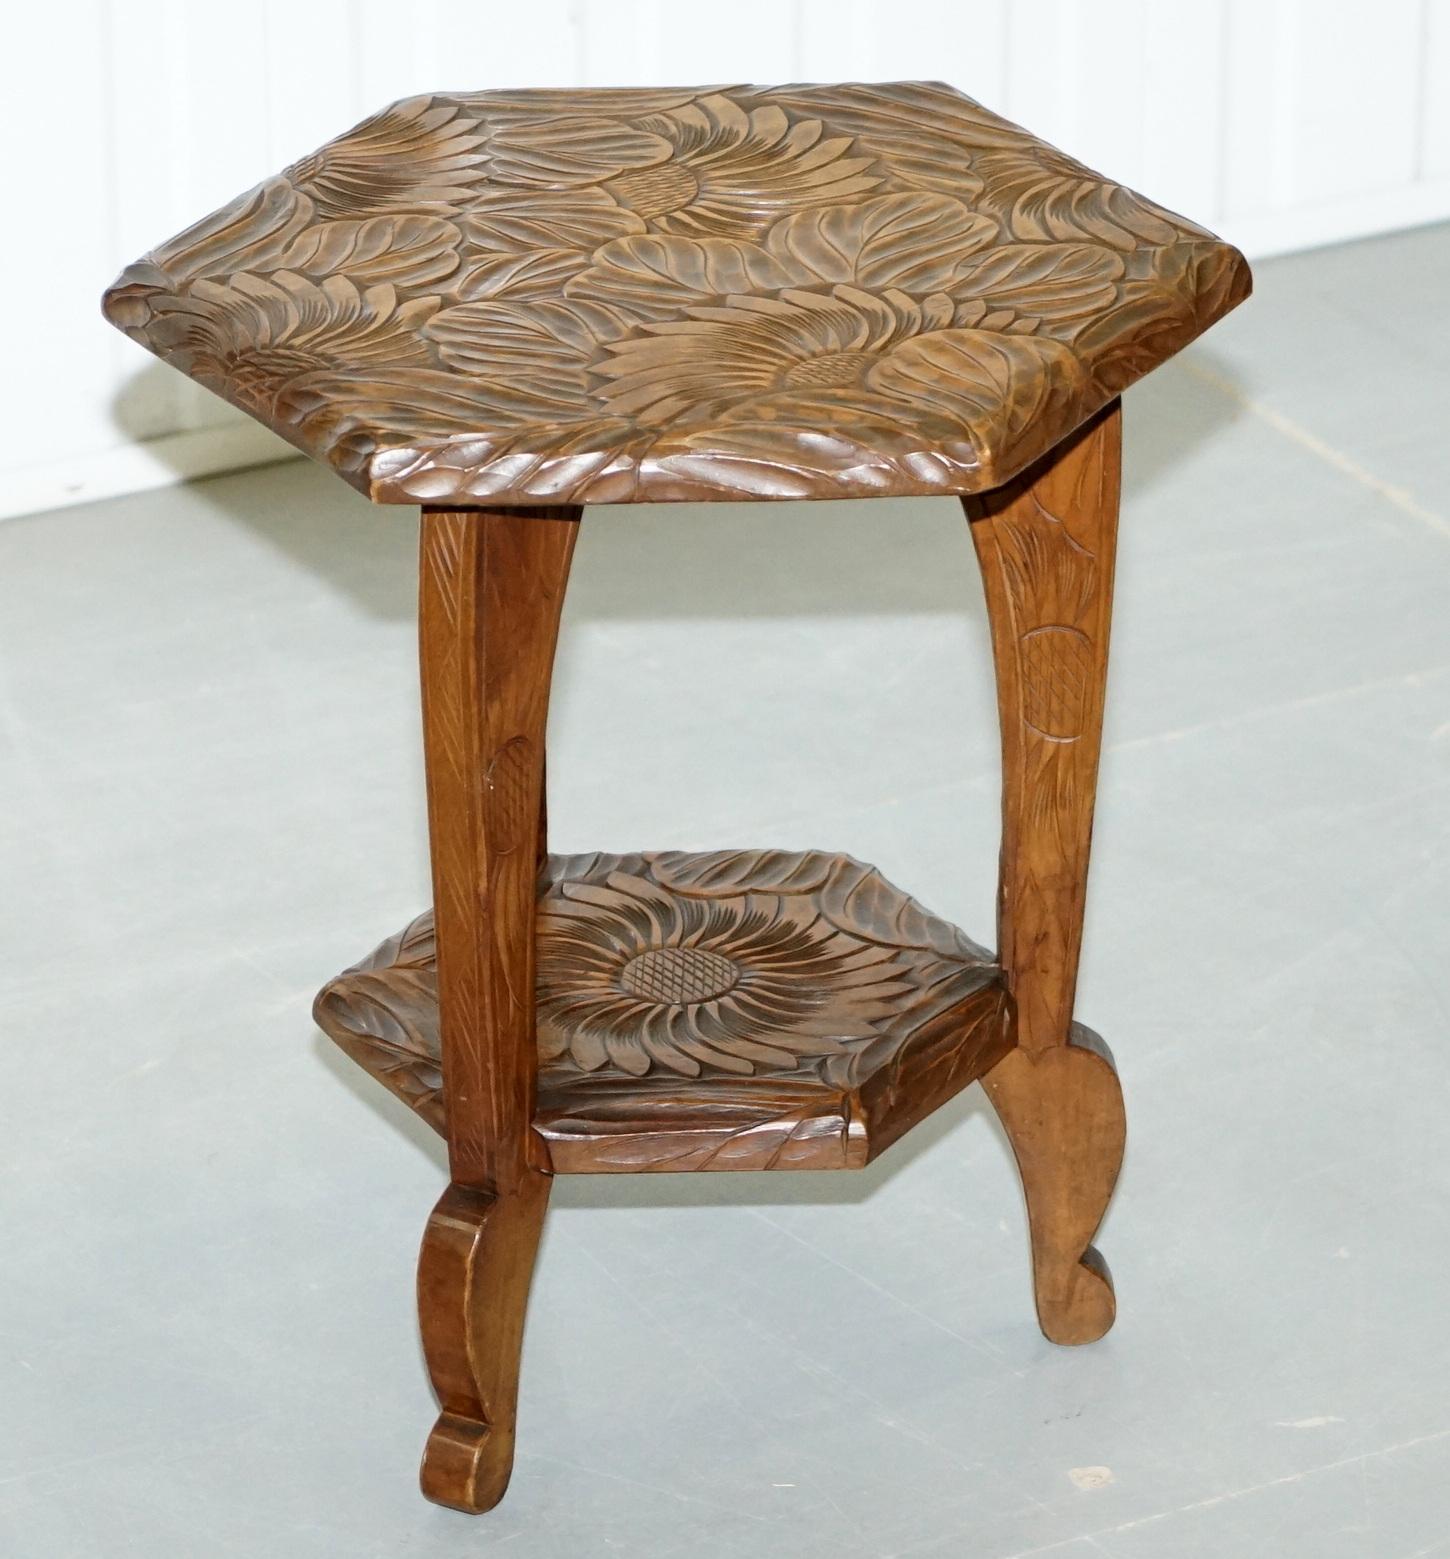 We are delighted to offer for sale this lovely Liberty’s London 1905 Japanese mahogany jardinière plant pot stand

A good looking piece, its hand carved from top to bottom with floral detailing, I have another of these larger and narrower listed